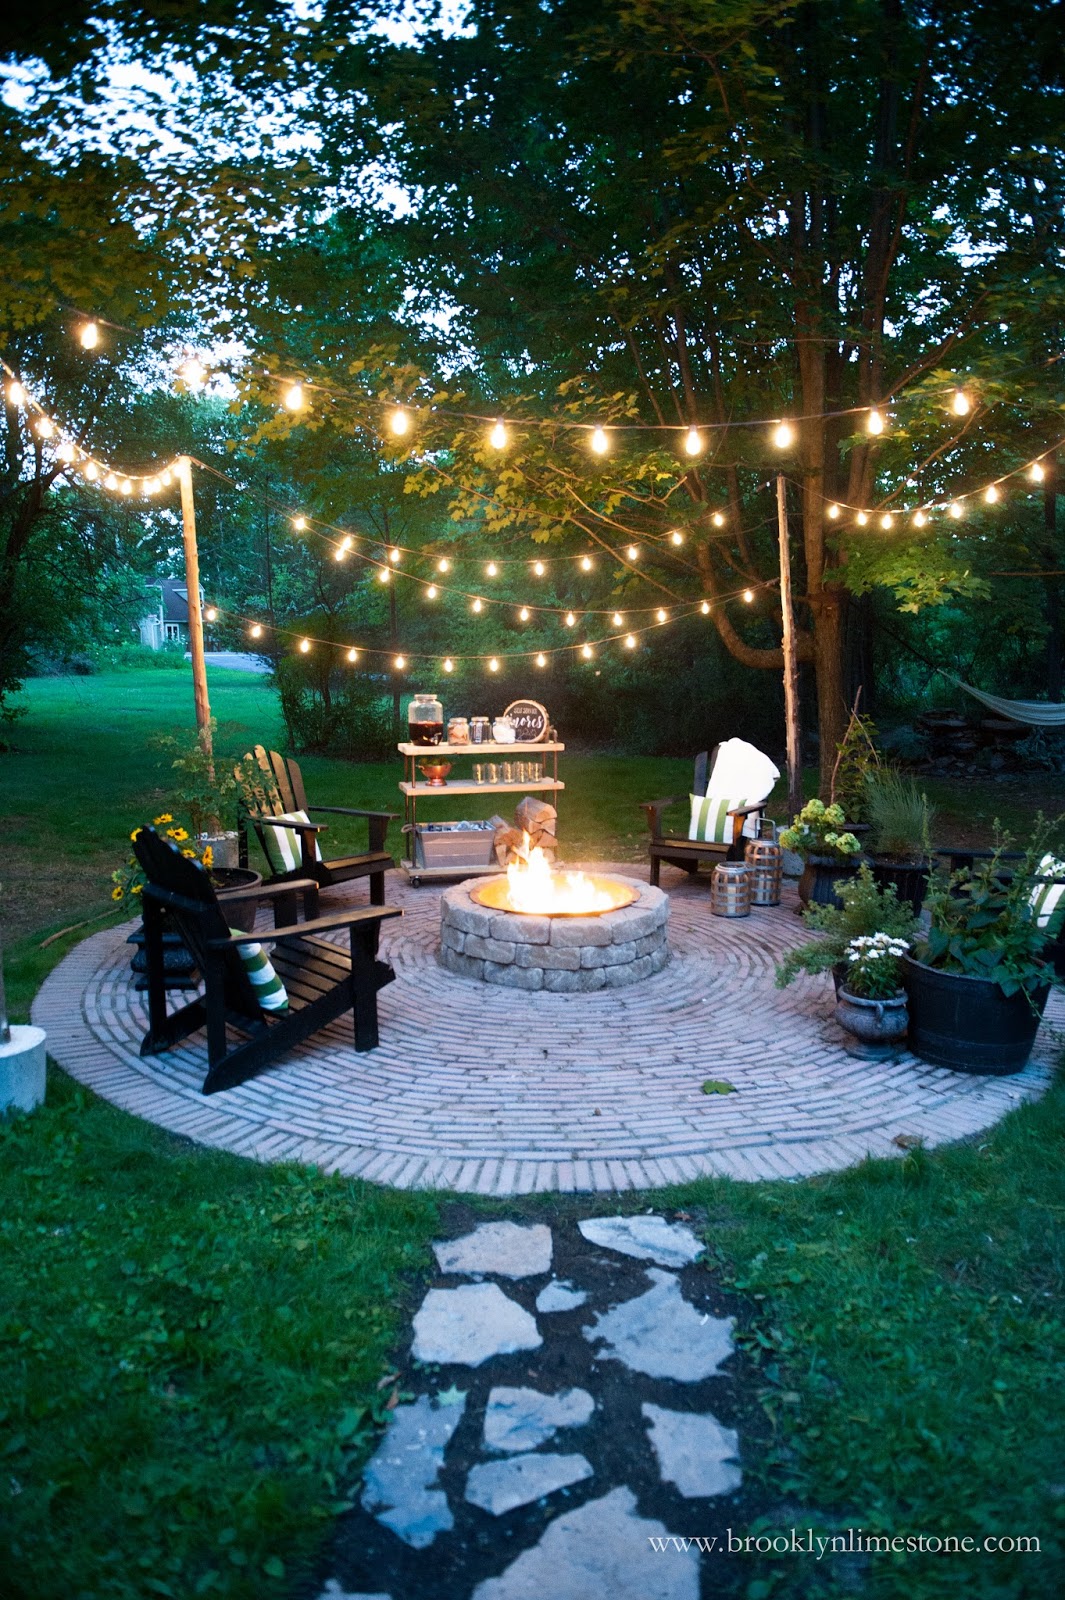 An outdoor round flat to the ground rock work patio with chairs around the fire pit and a string of light above it.